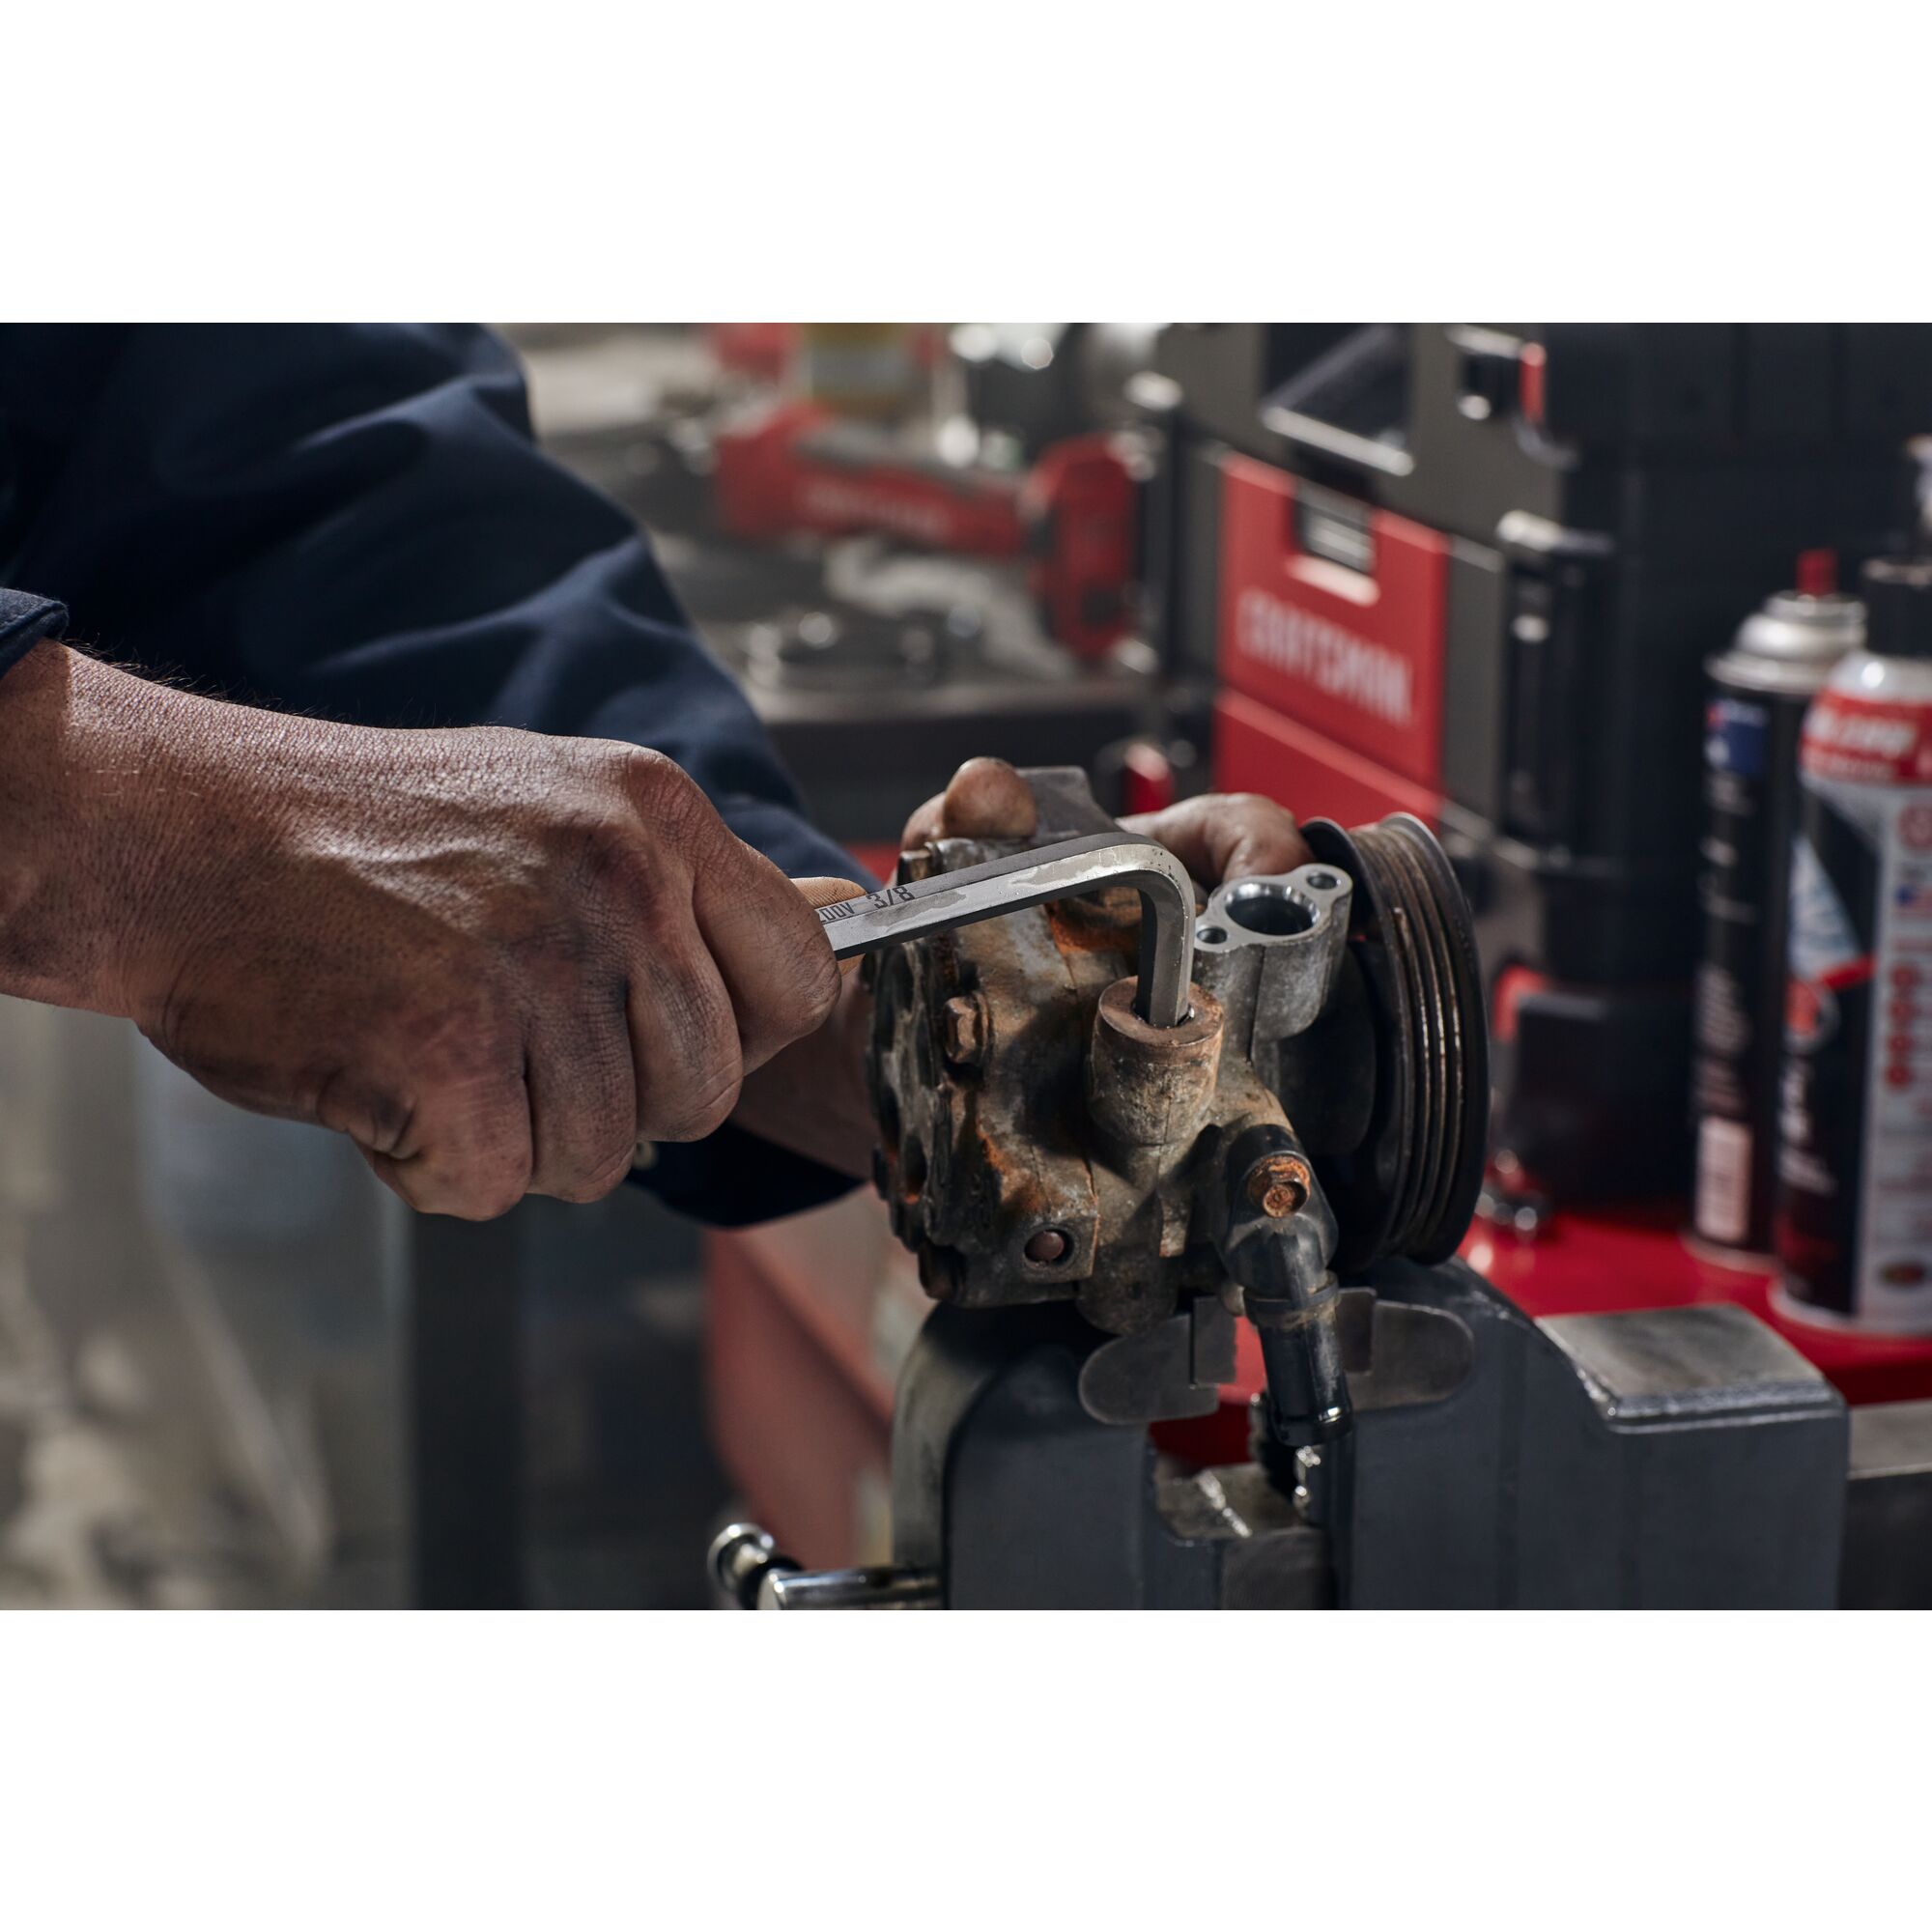 View of CRAFTSMAN Screwdrivers: Hex Keys  being used by consumer